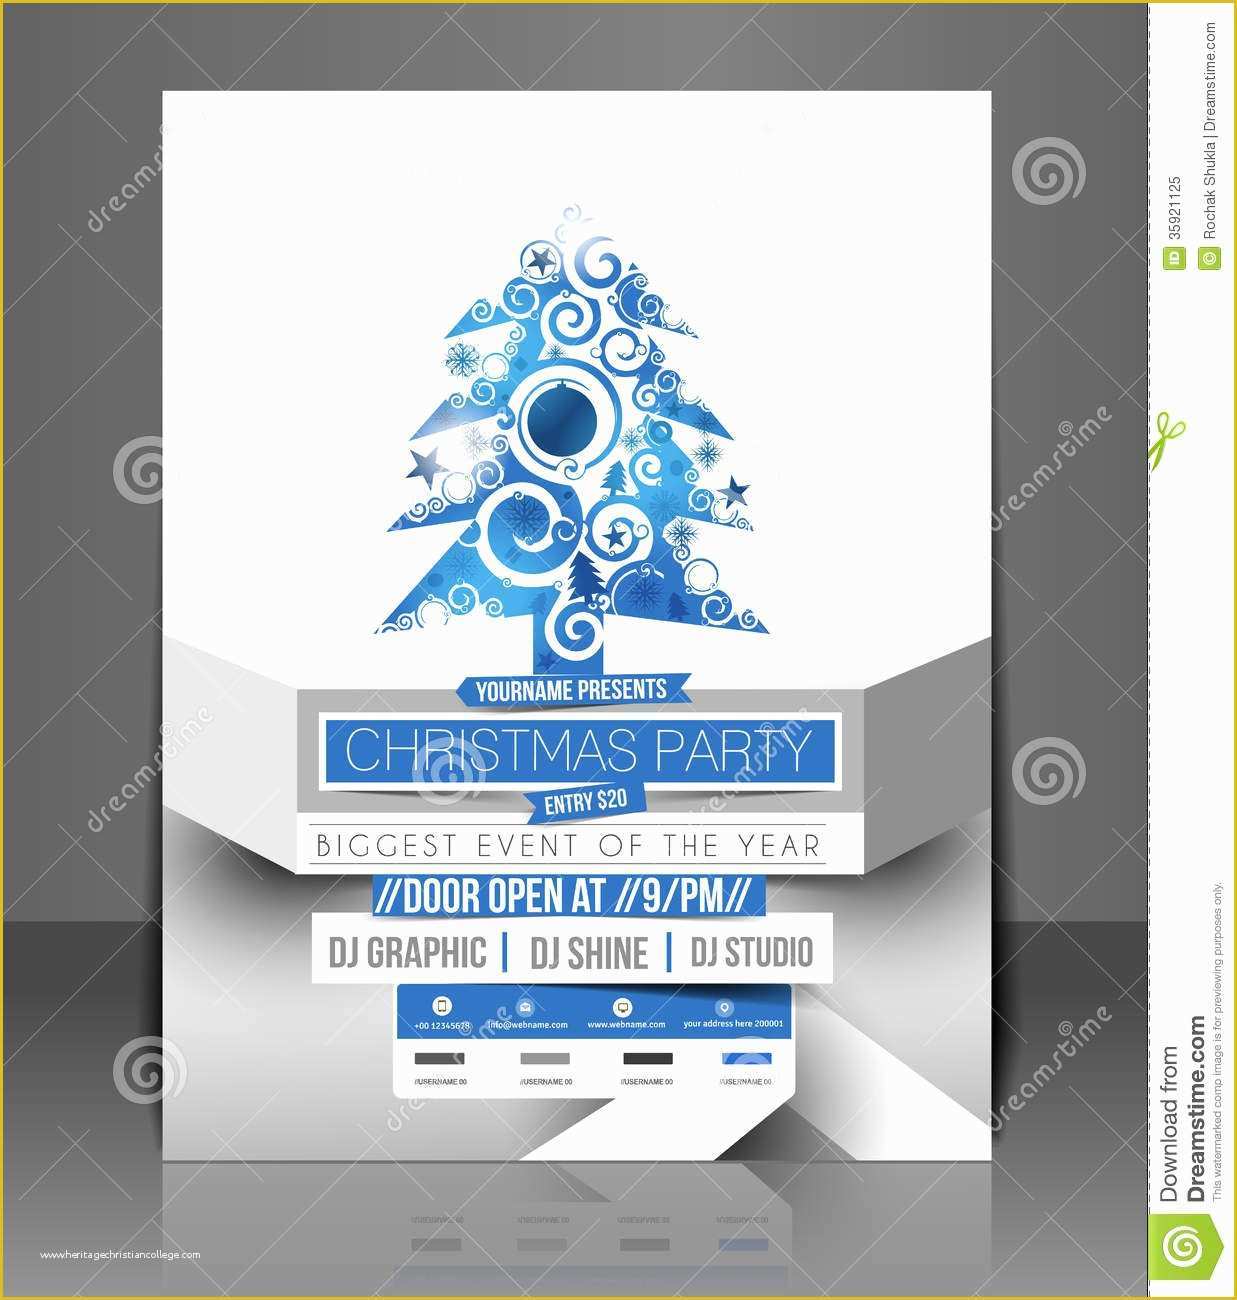 Holiday Party Flyer Template Free Of Christmas Party Flyer Stock Vector Illustration Of